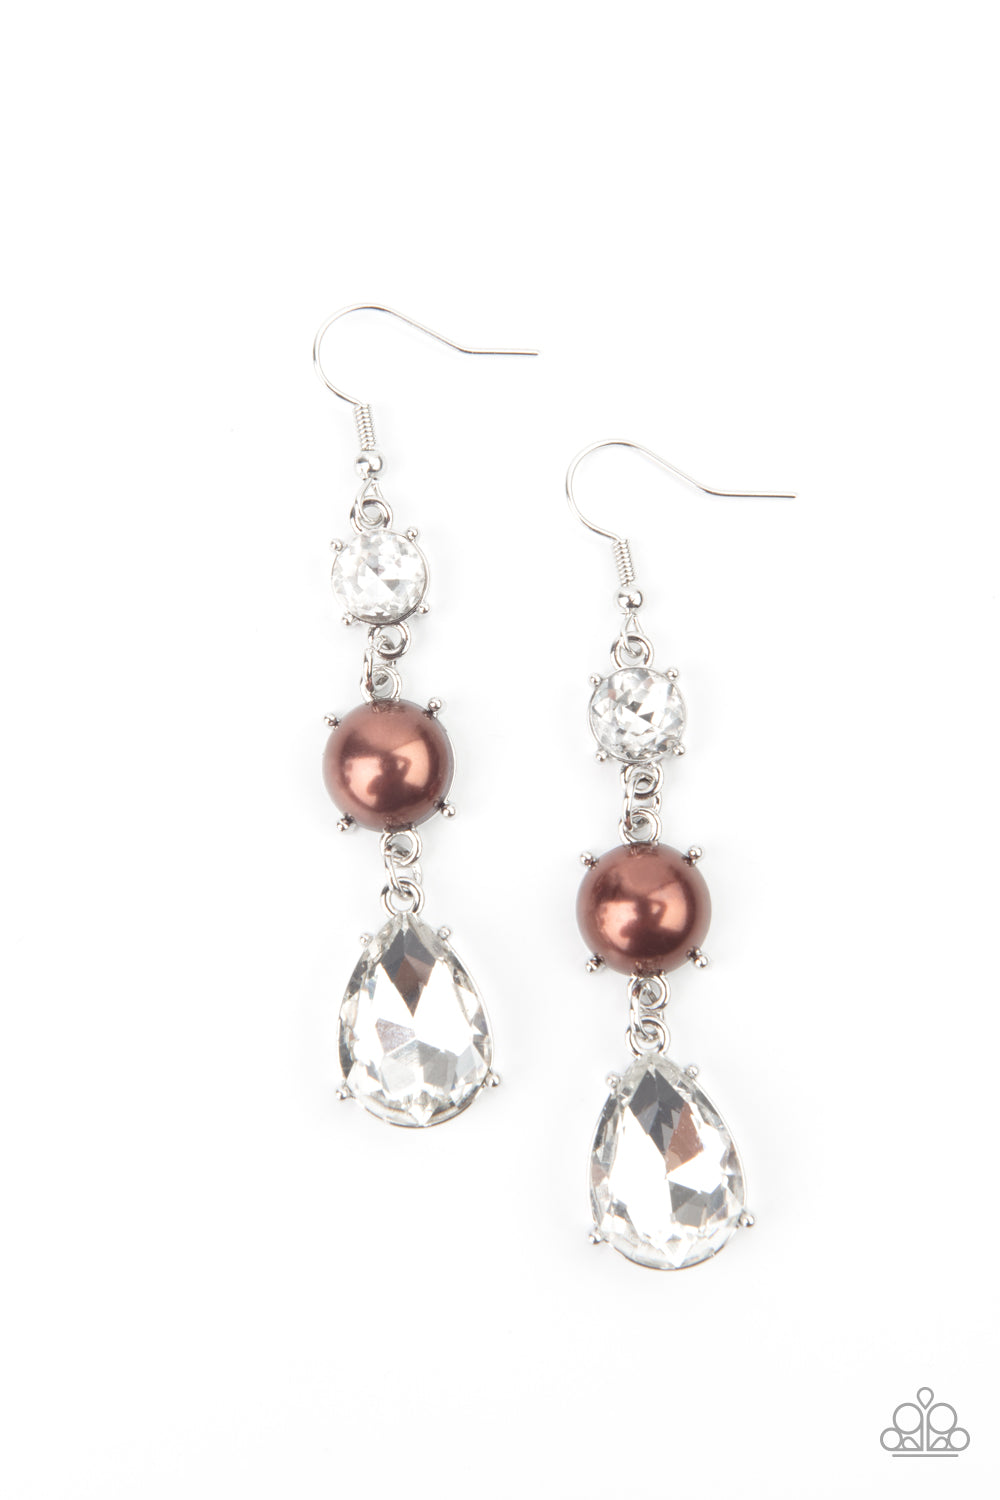 Timeless designed earring, danglling from a fish hook with bling and beads.